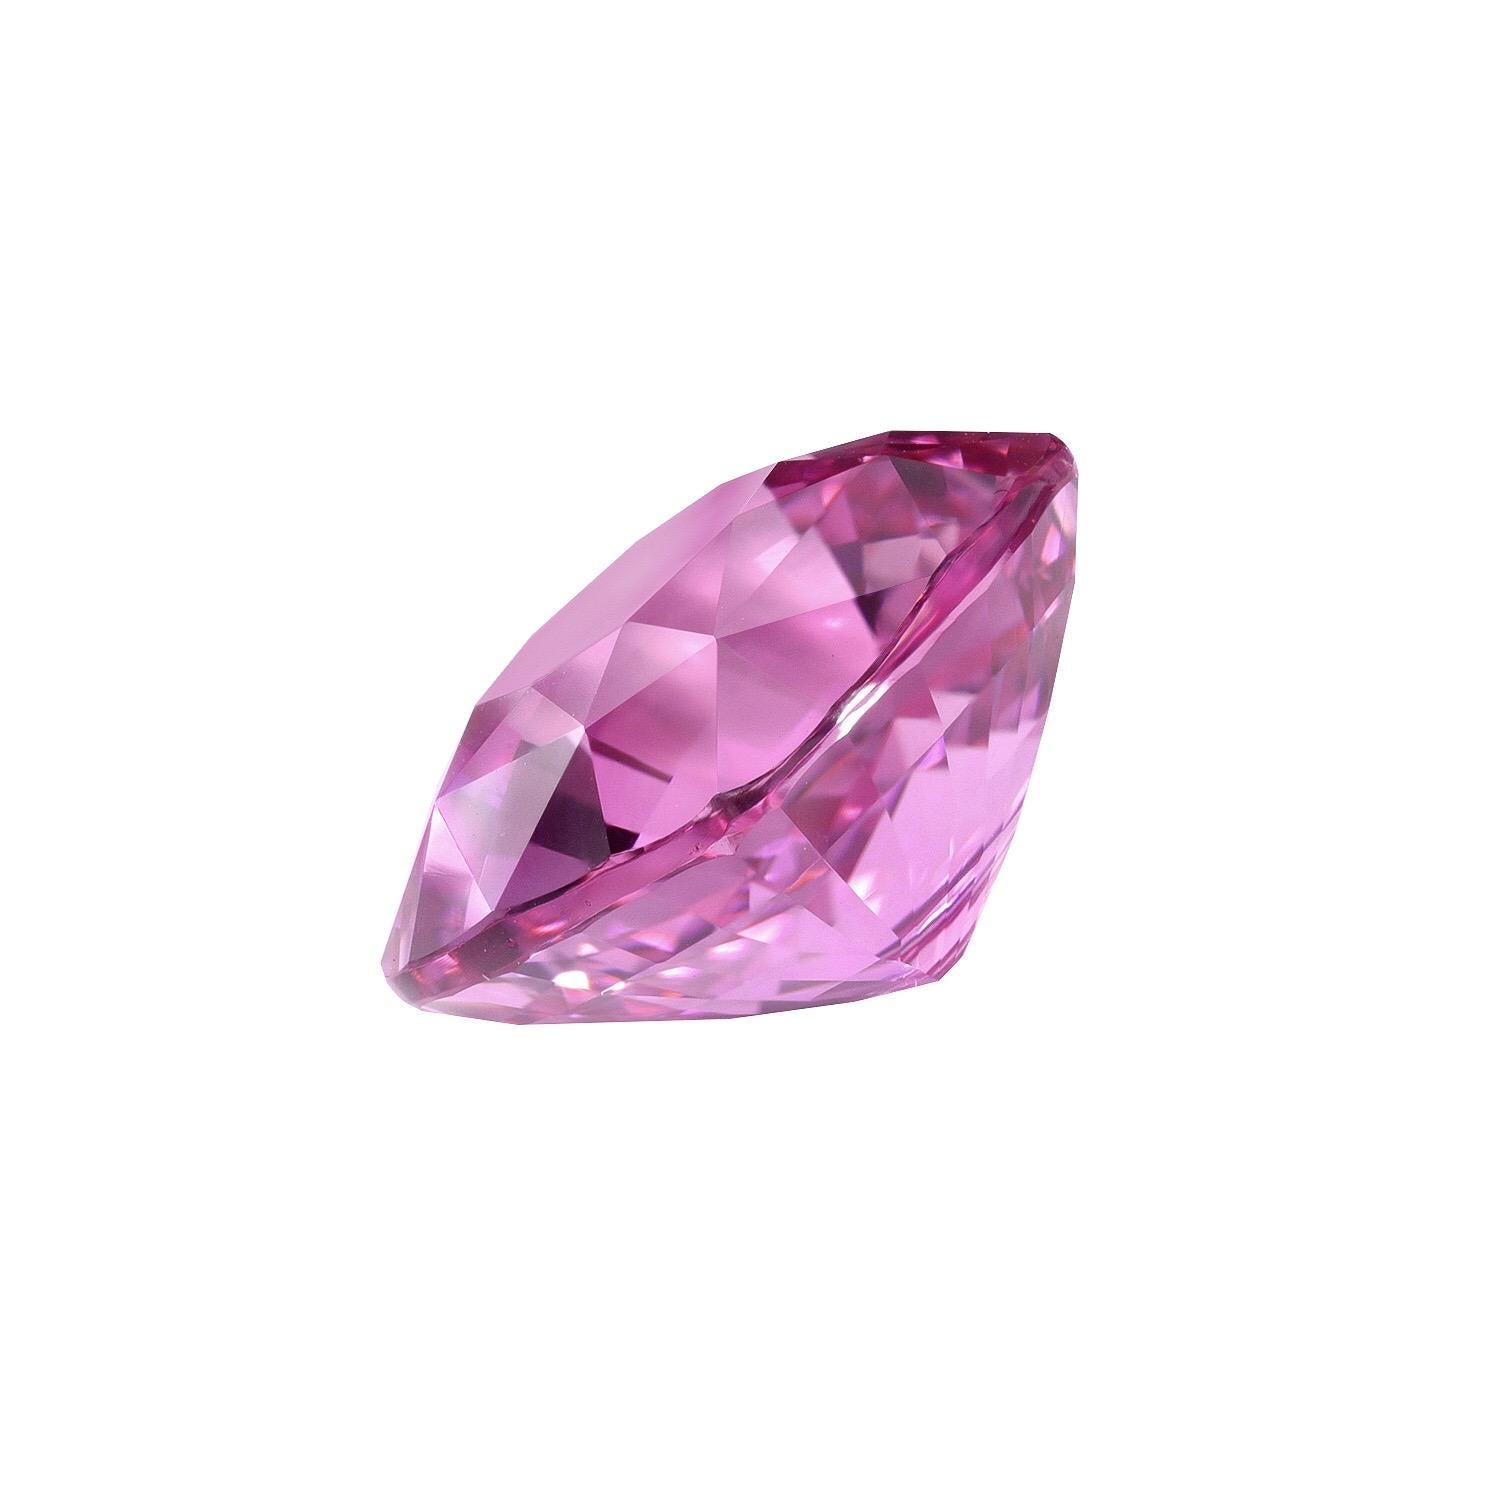 Magnificent 4.07 carat Pink Sapphire cushion gem, offered loose to a world-class gemstone connoisseur.
The GIA certificate is attached to the image selection for your reference.
Returns are accepted and paid by us within 7 days of delivery.
We offer